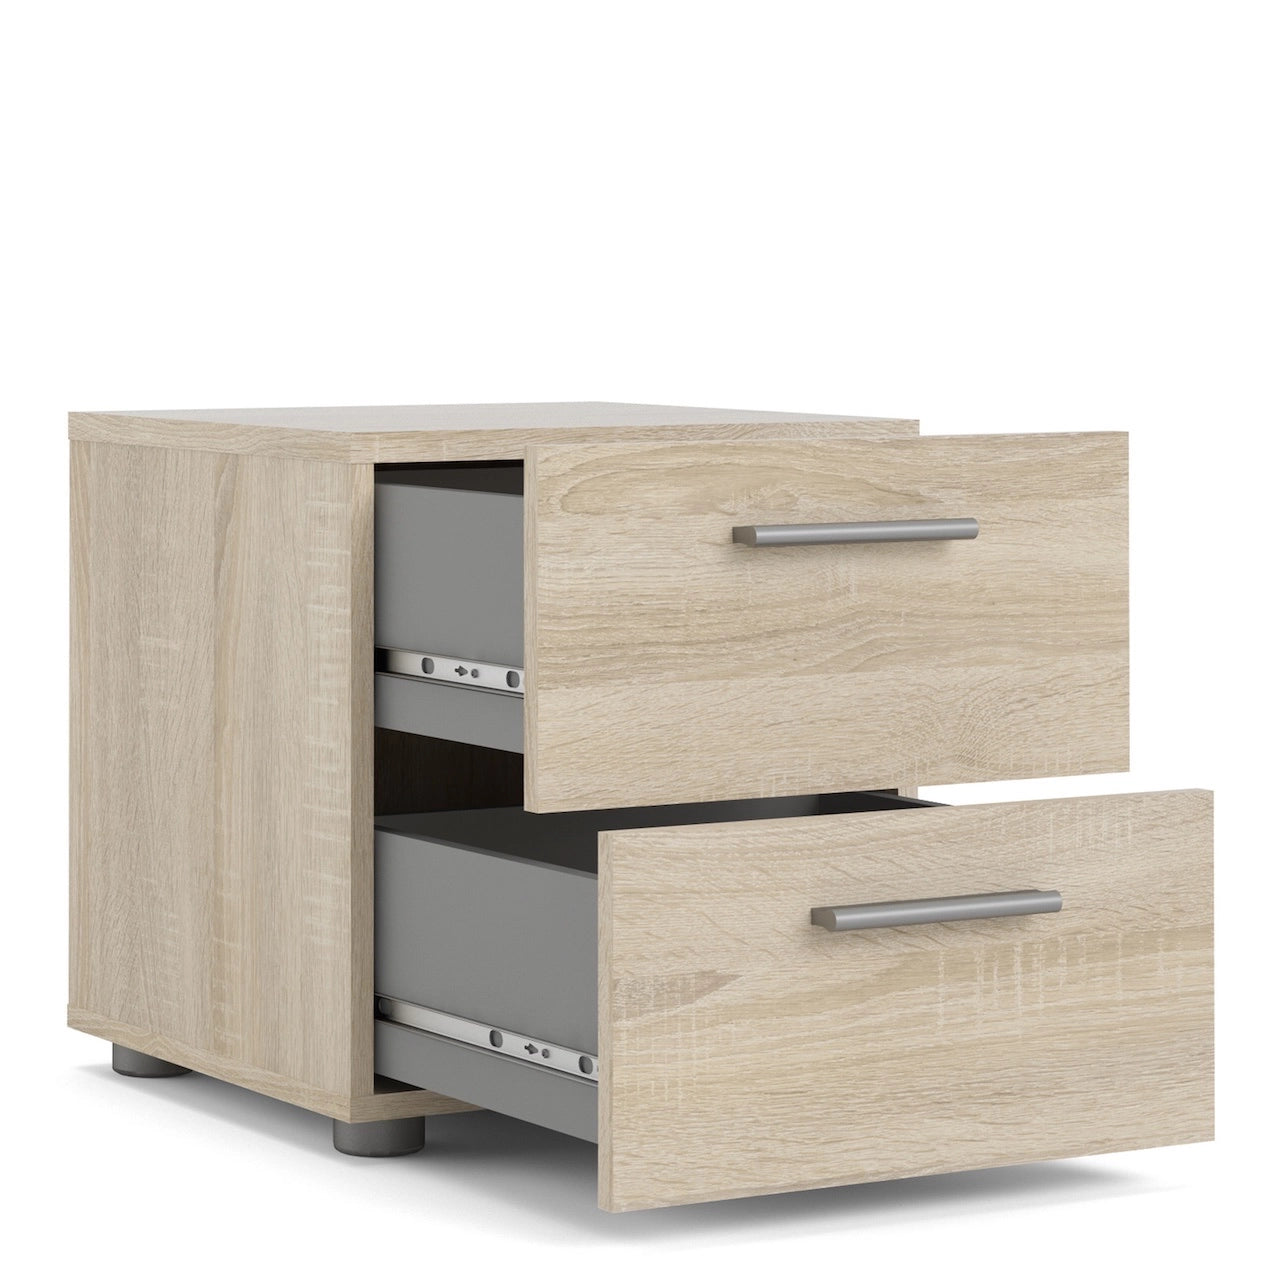 Furniture To Go Pepe Bedside 2 Drawers in Oak